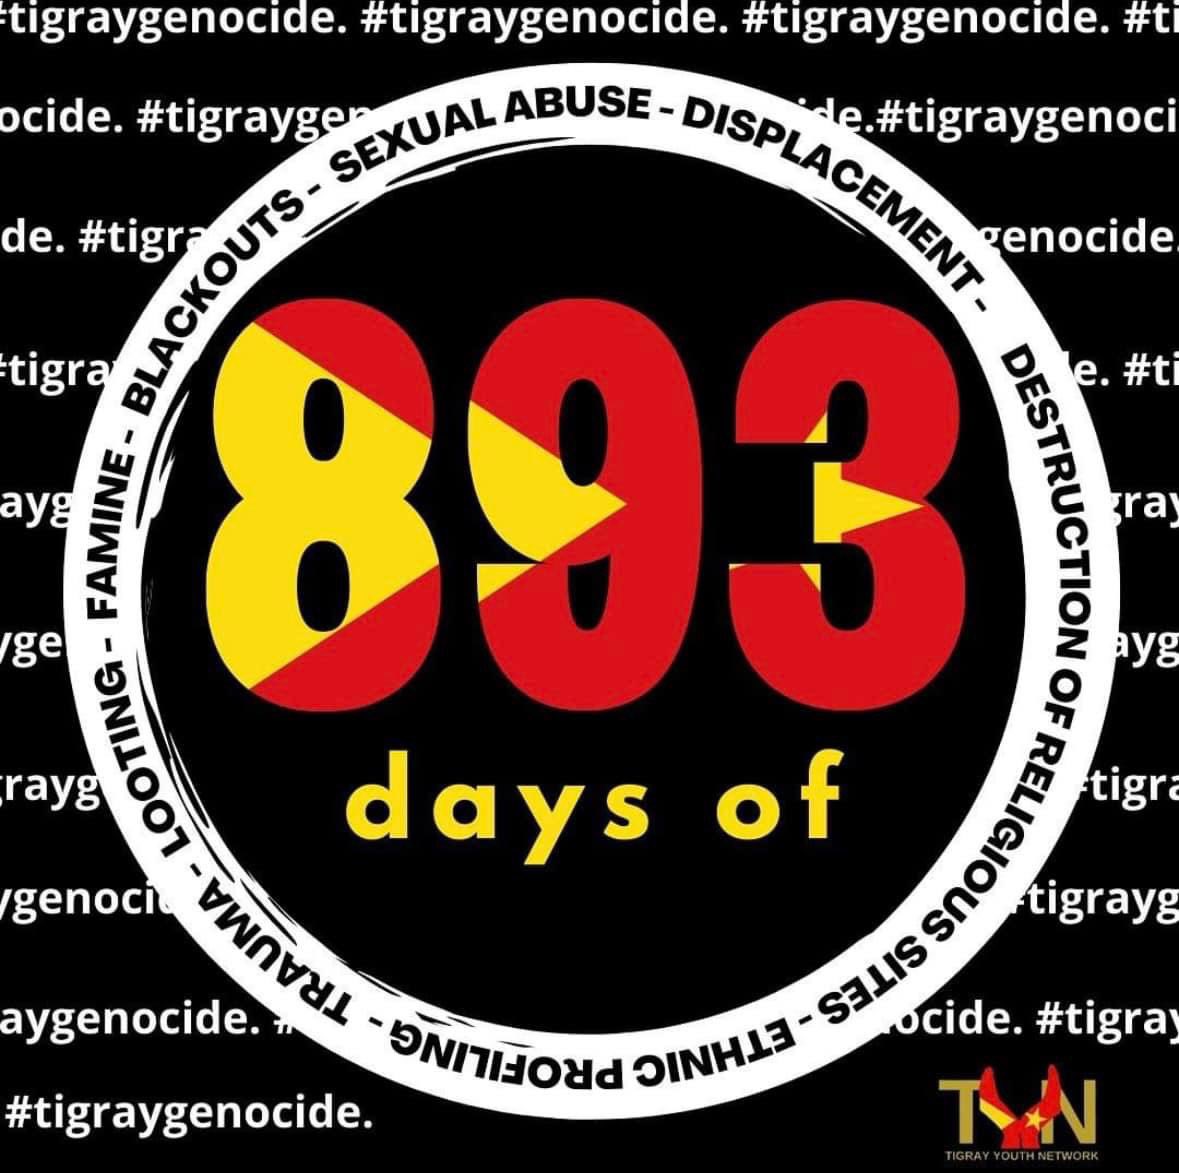 #893days of #TigrayGenocied 
⭕️ Still #TigrayIsBleeding: 
The situation in #Irob and #Kunama in #Tigray occupied and shelled by #Eritrea is devastating, with large scale displacement of the civilian population. 
#FreeTigray 
#FreeIrobAndKunama 
@UN_HRC @UNOCHA @JosepBorrellF